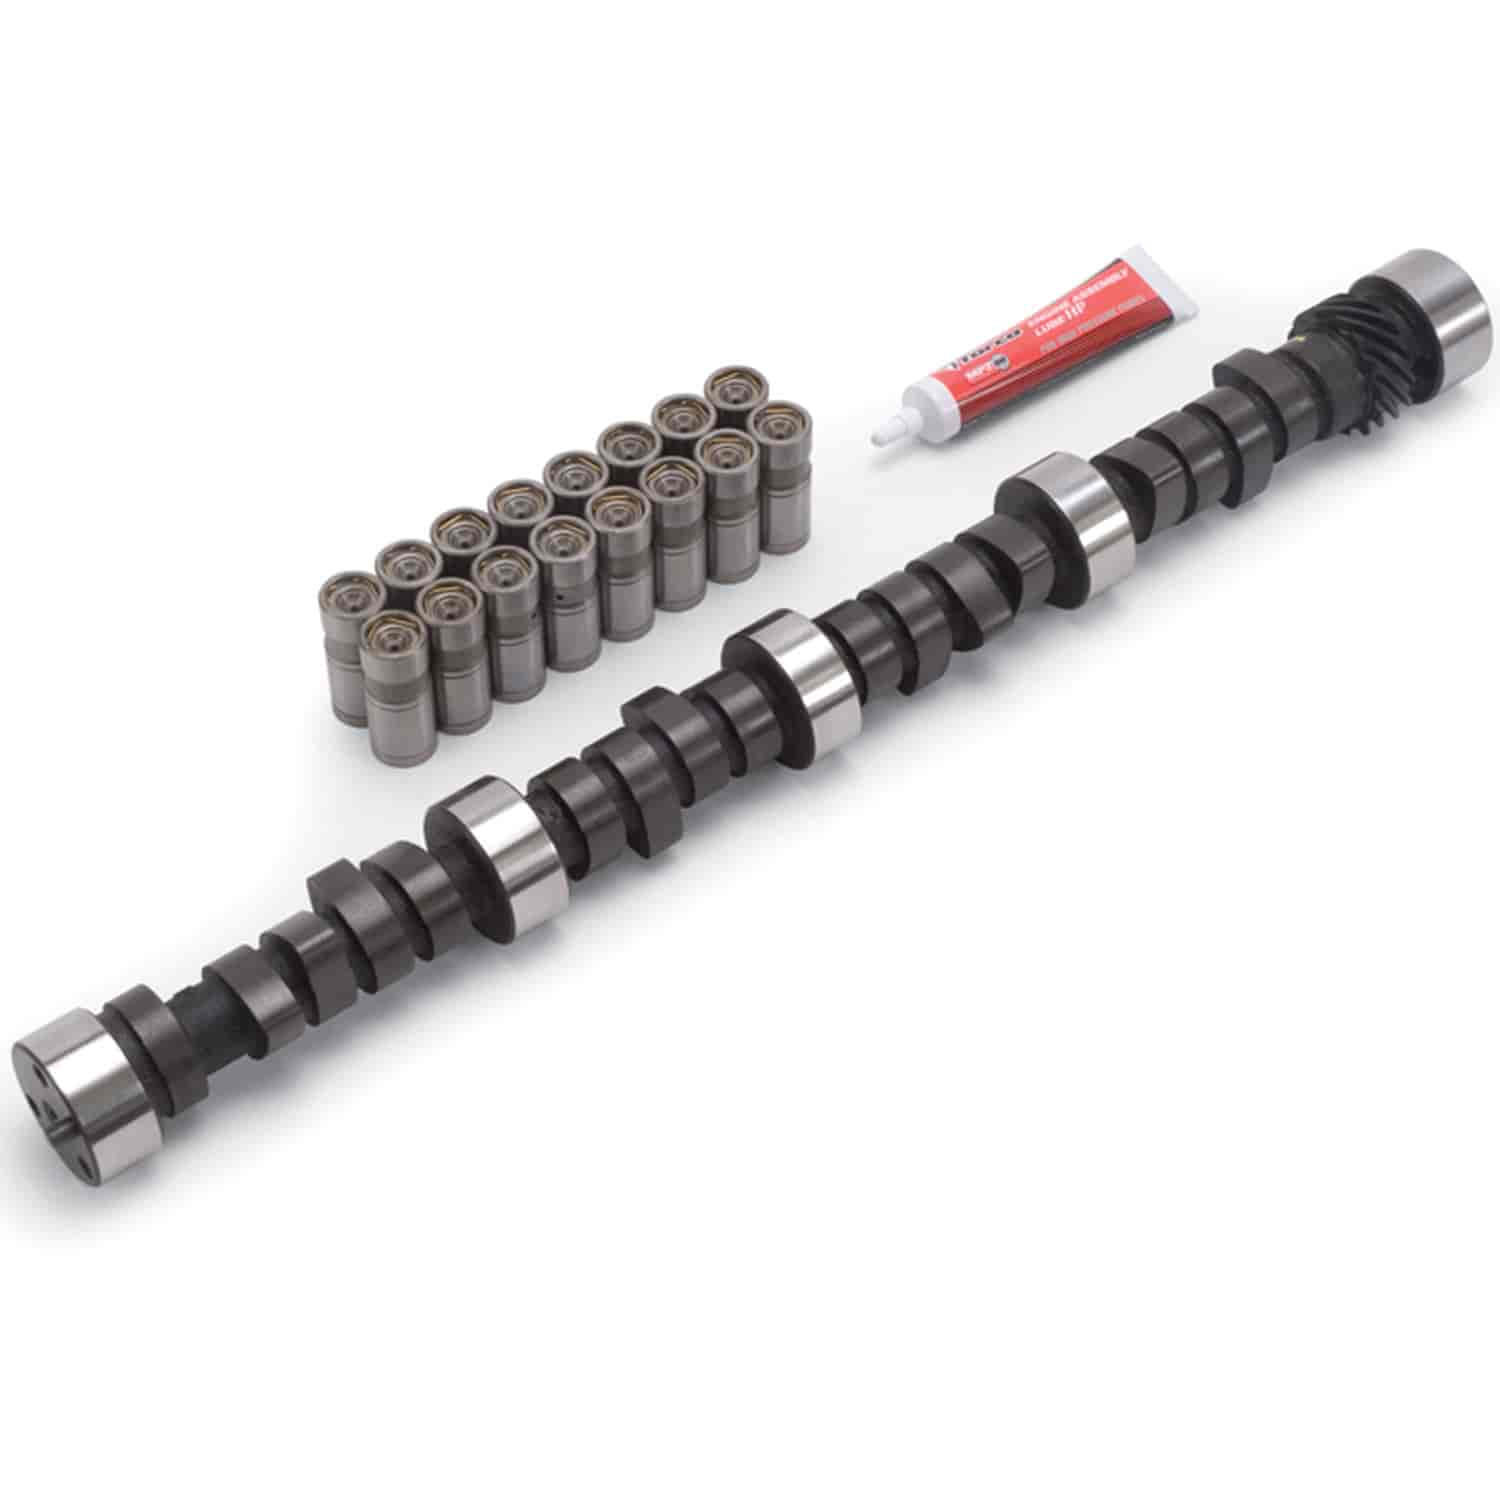 Performer-Plus Camshaft Kit for Small Block Chevy